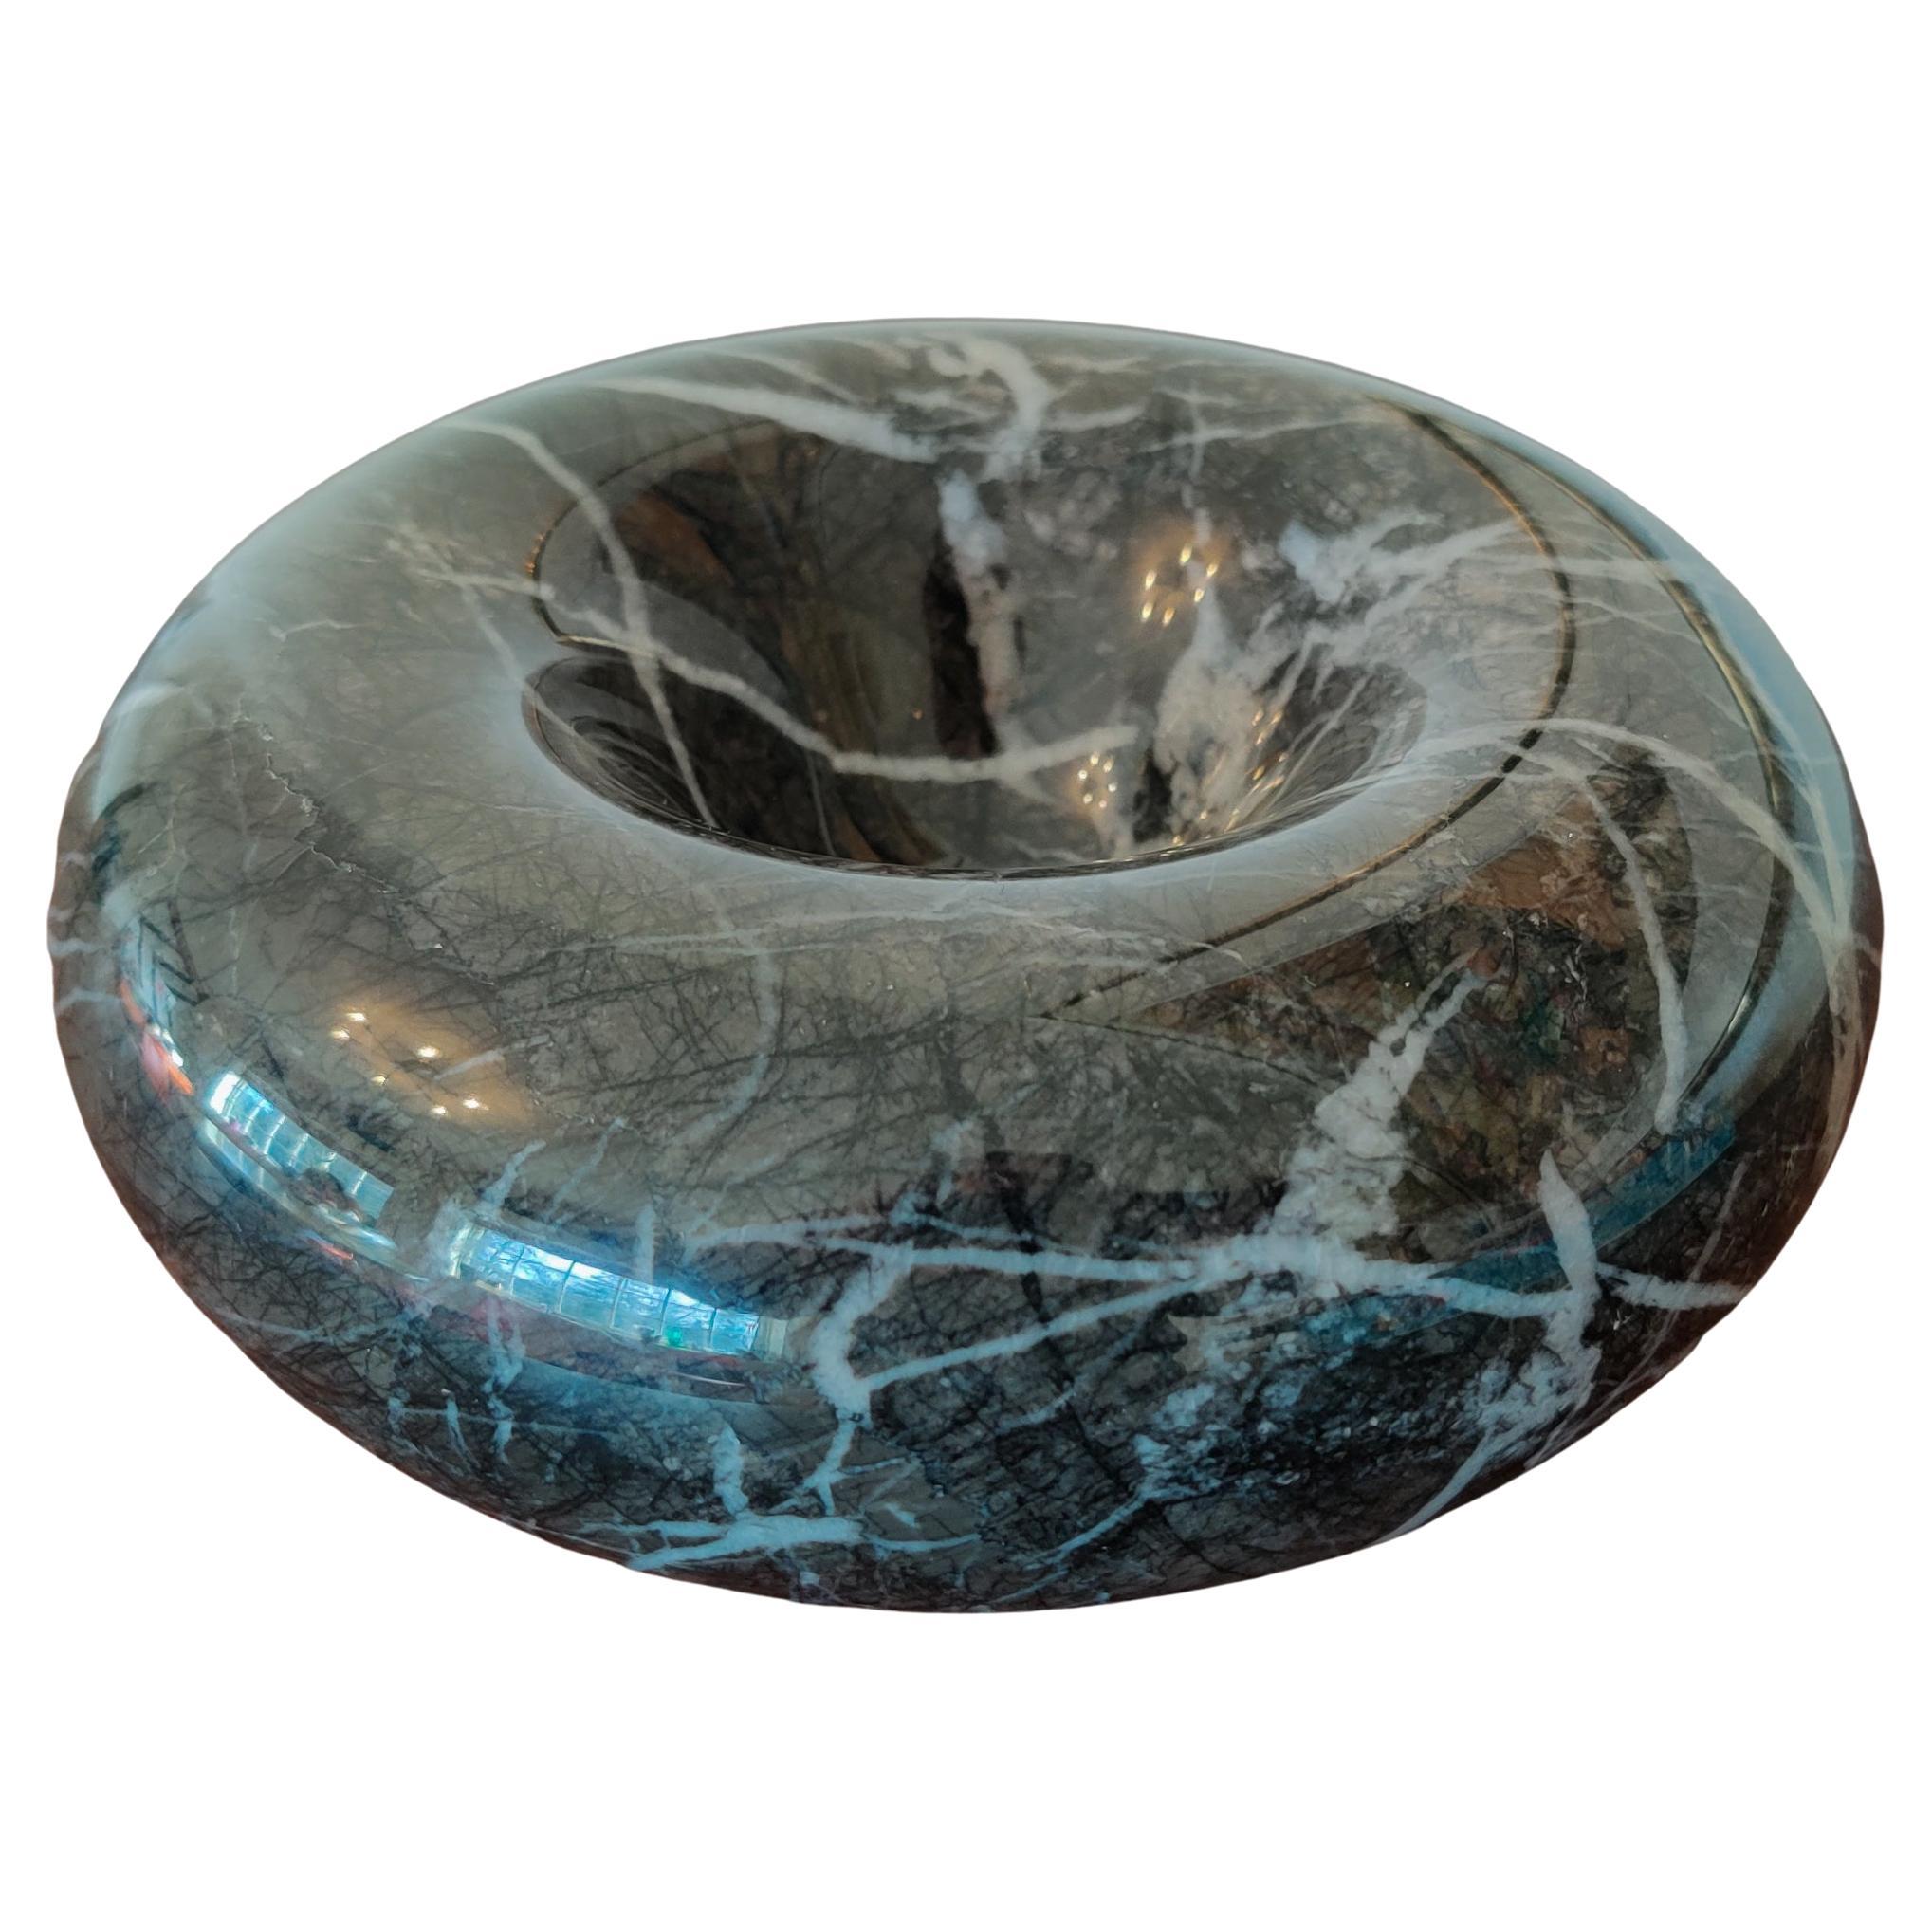 Sergio Asti Black & White Veined Marble Bowl for Up & Up